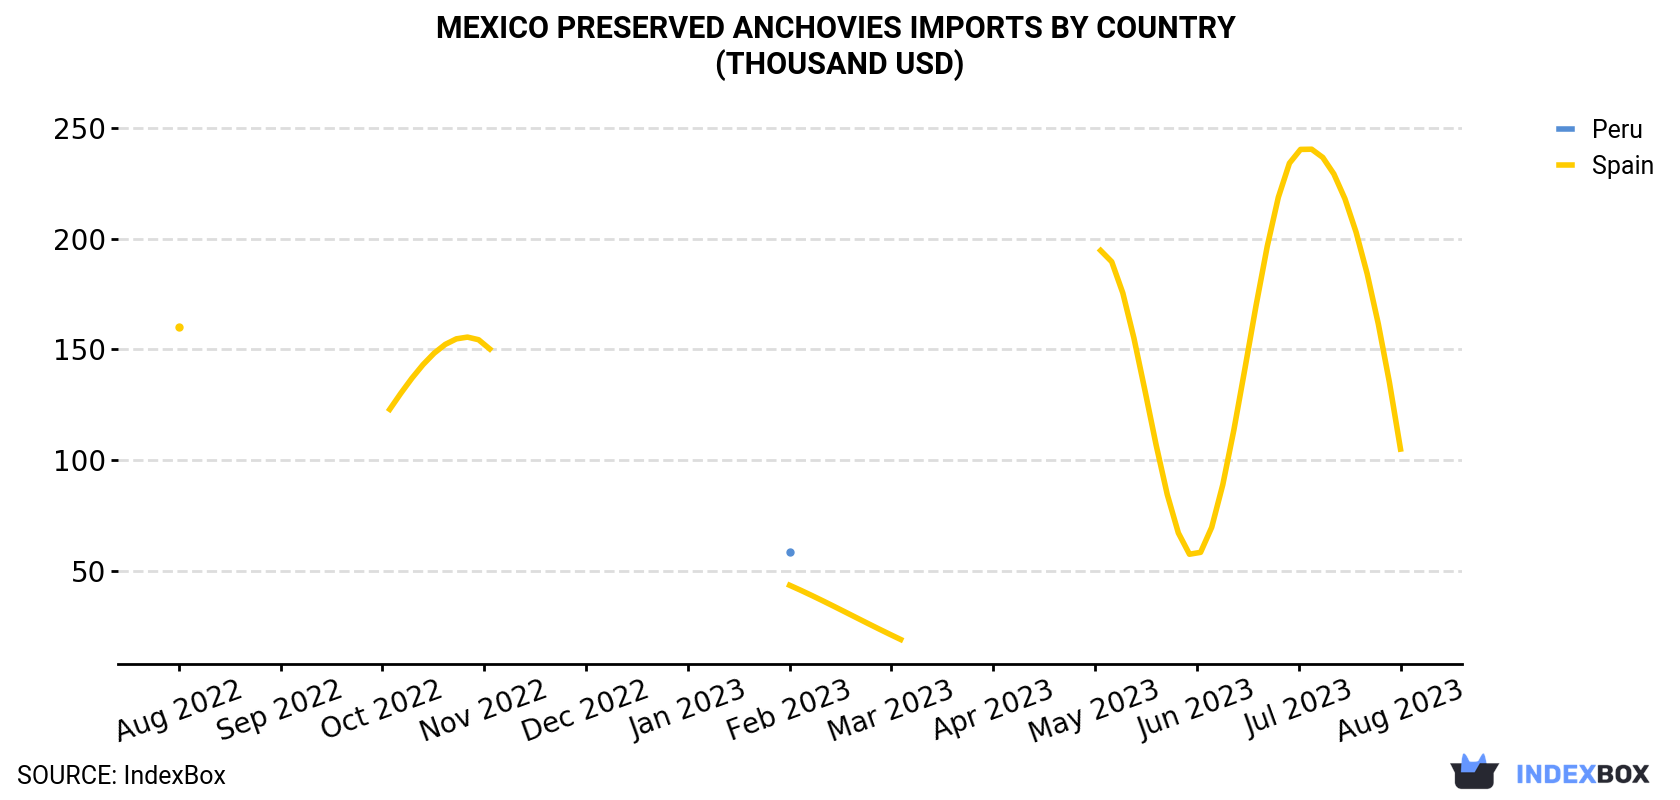 Mexico Preserved Anchovies Imports By Country (Thousand USD)